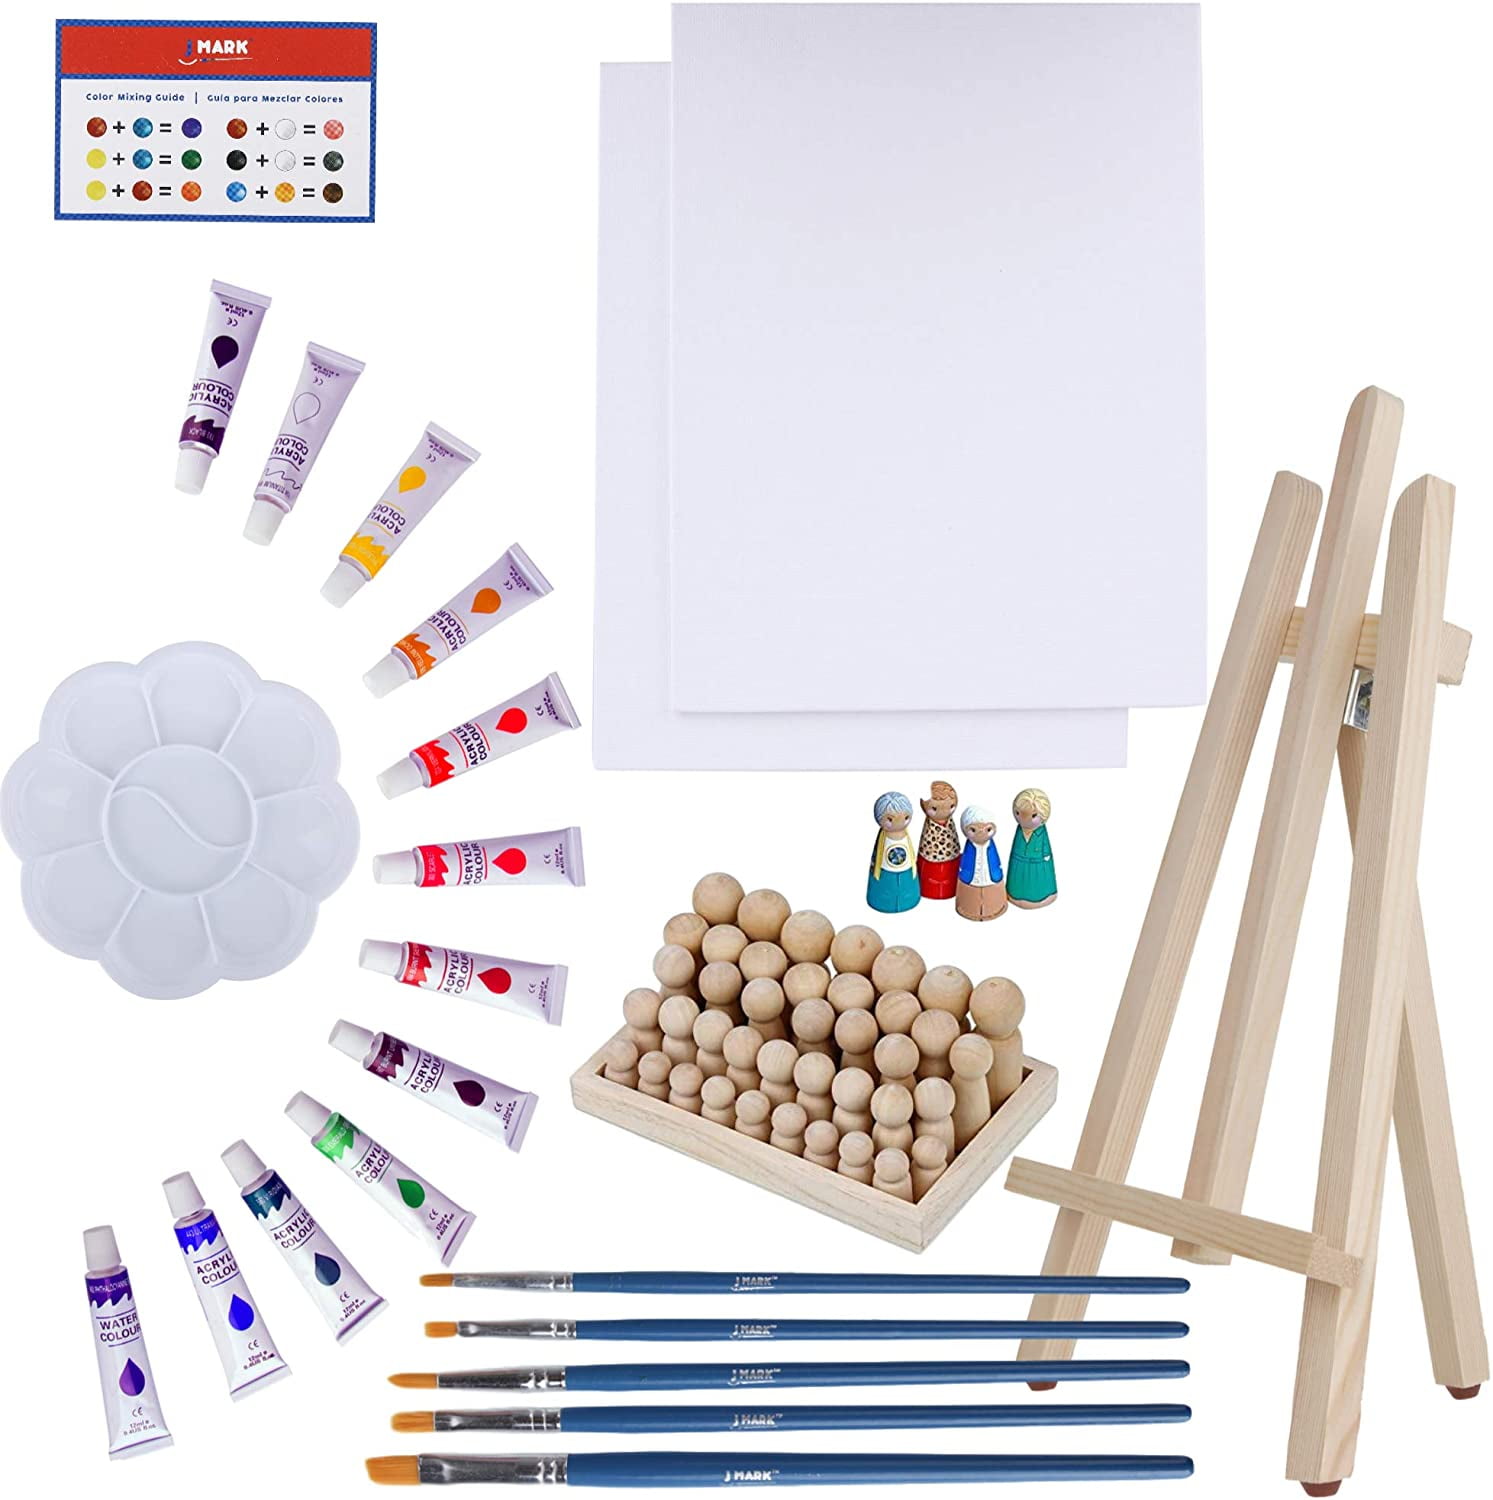 MEEDEN Acrylic Painting Set, Deluxe Painting Kit with Wood Easel Box,  Artist Grade Acrylic Paints, Paintbrushes, Canvas, Palettes, Gel Medium and